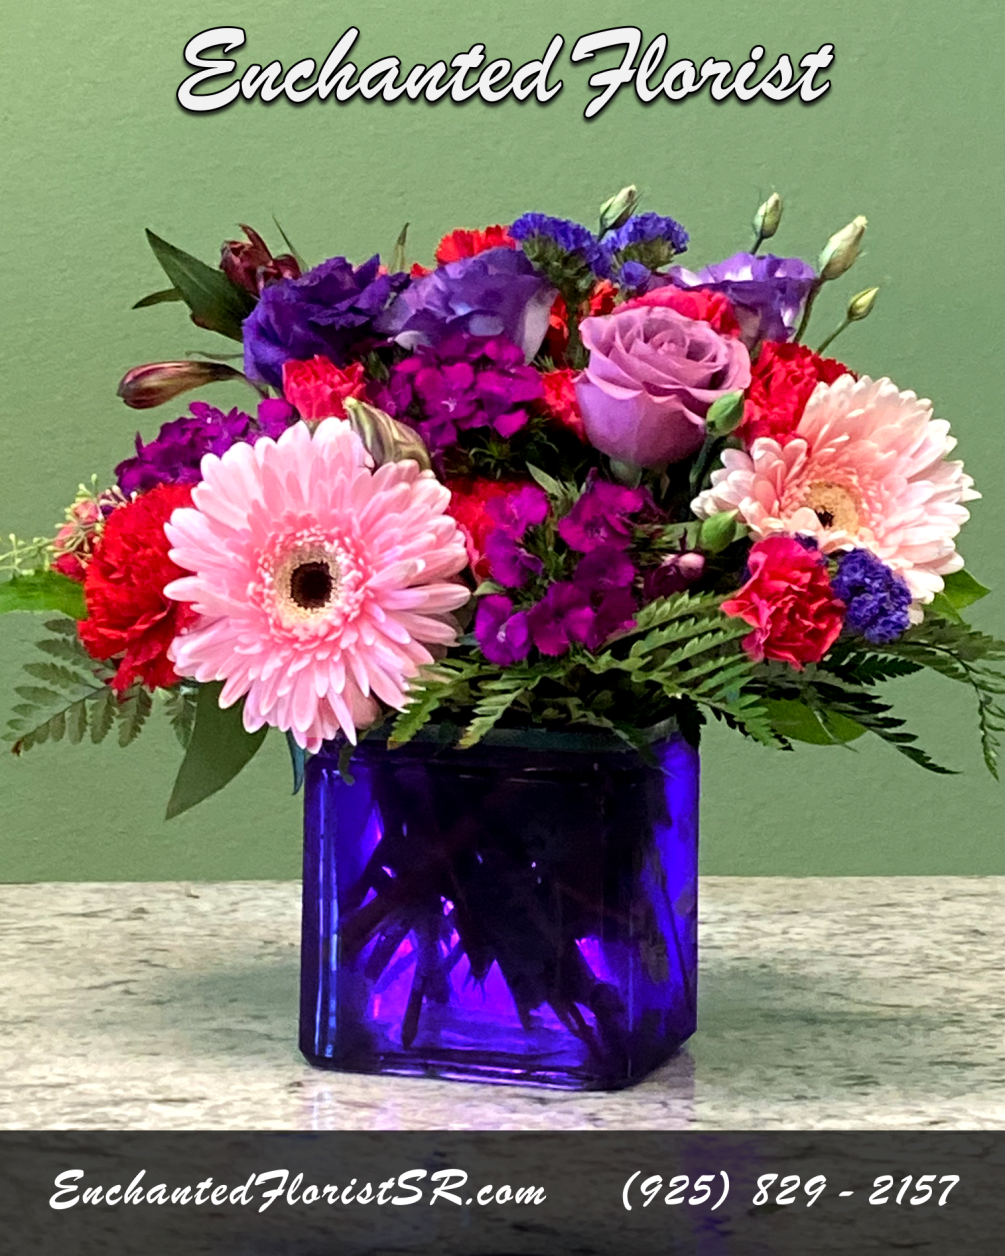 A charming mixed arrangement that adds a touch of playfulness to any